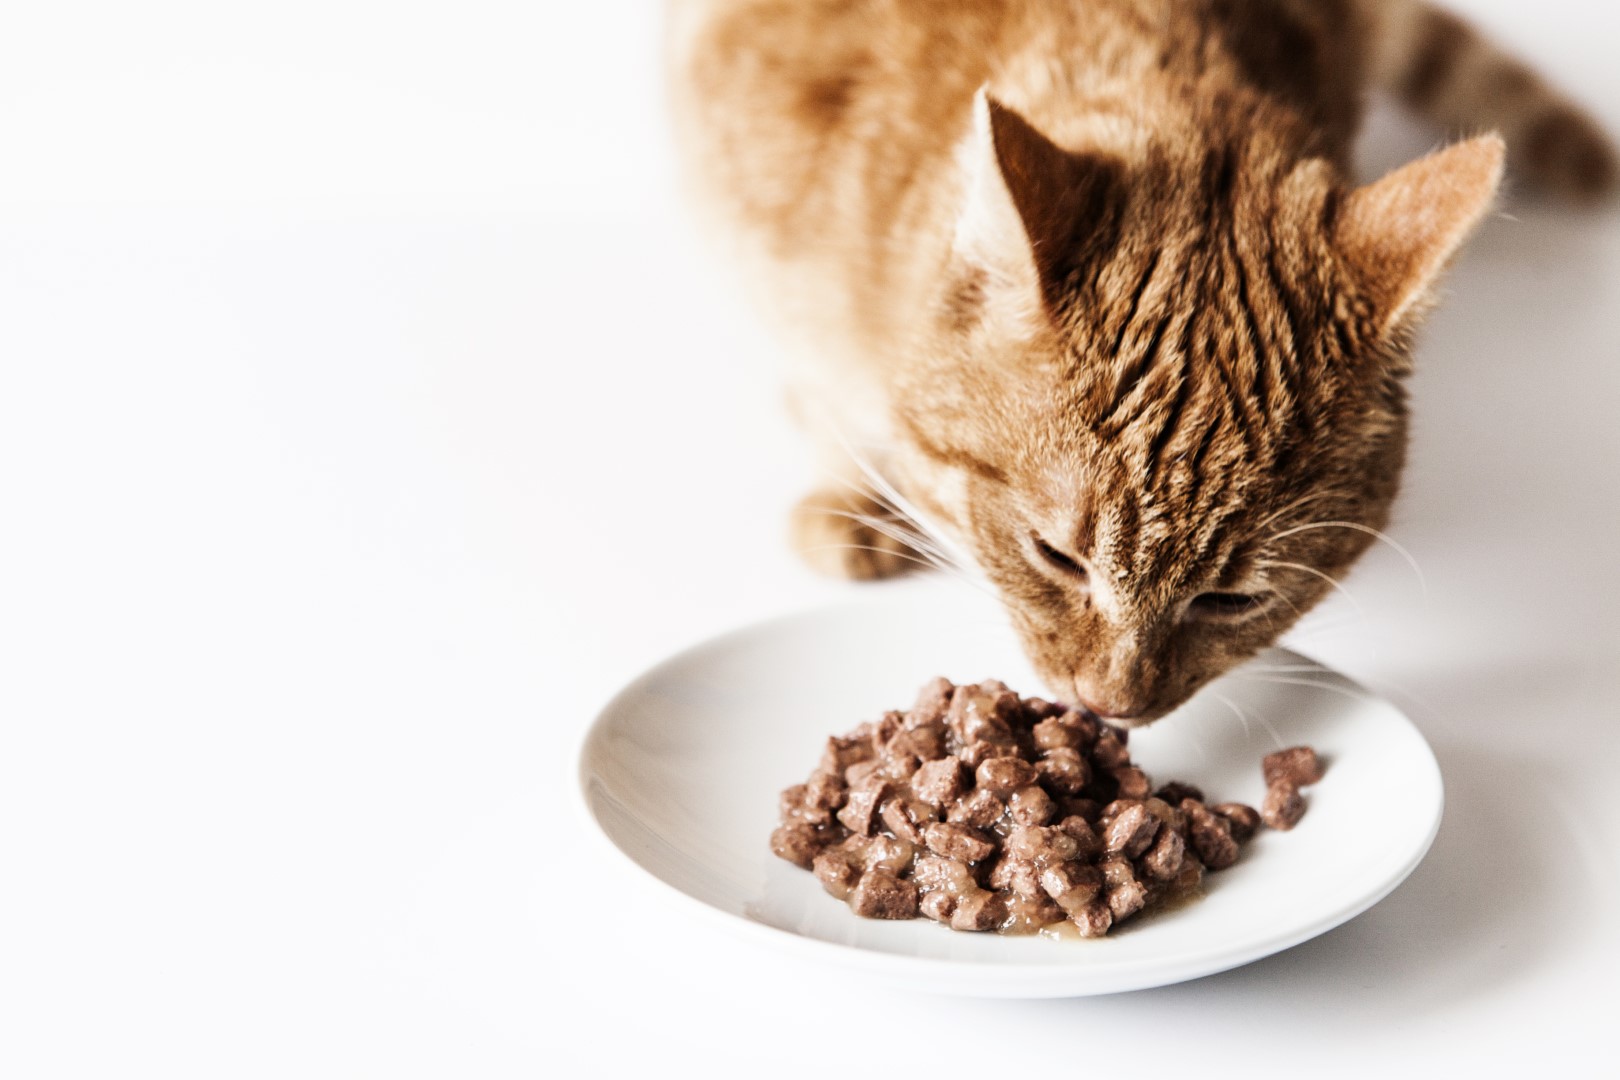 Wet, Dry, Commercial, or Homemade – What is the Best Diet for Your Cat?